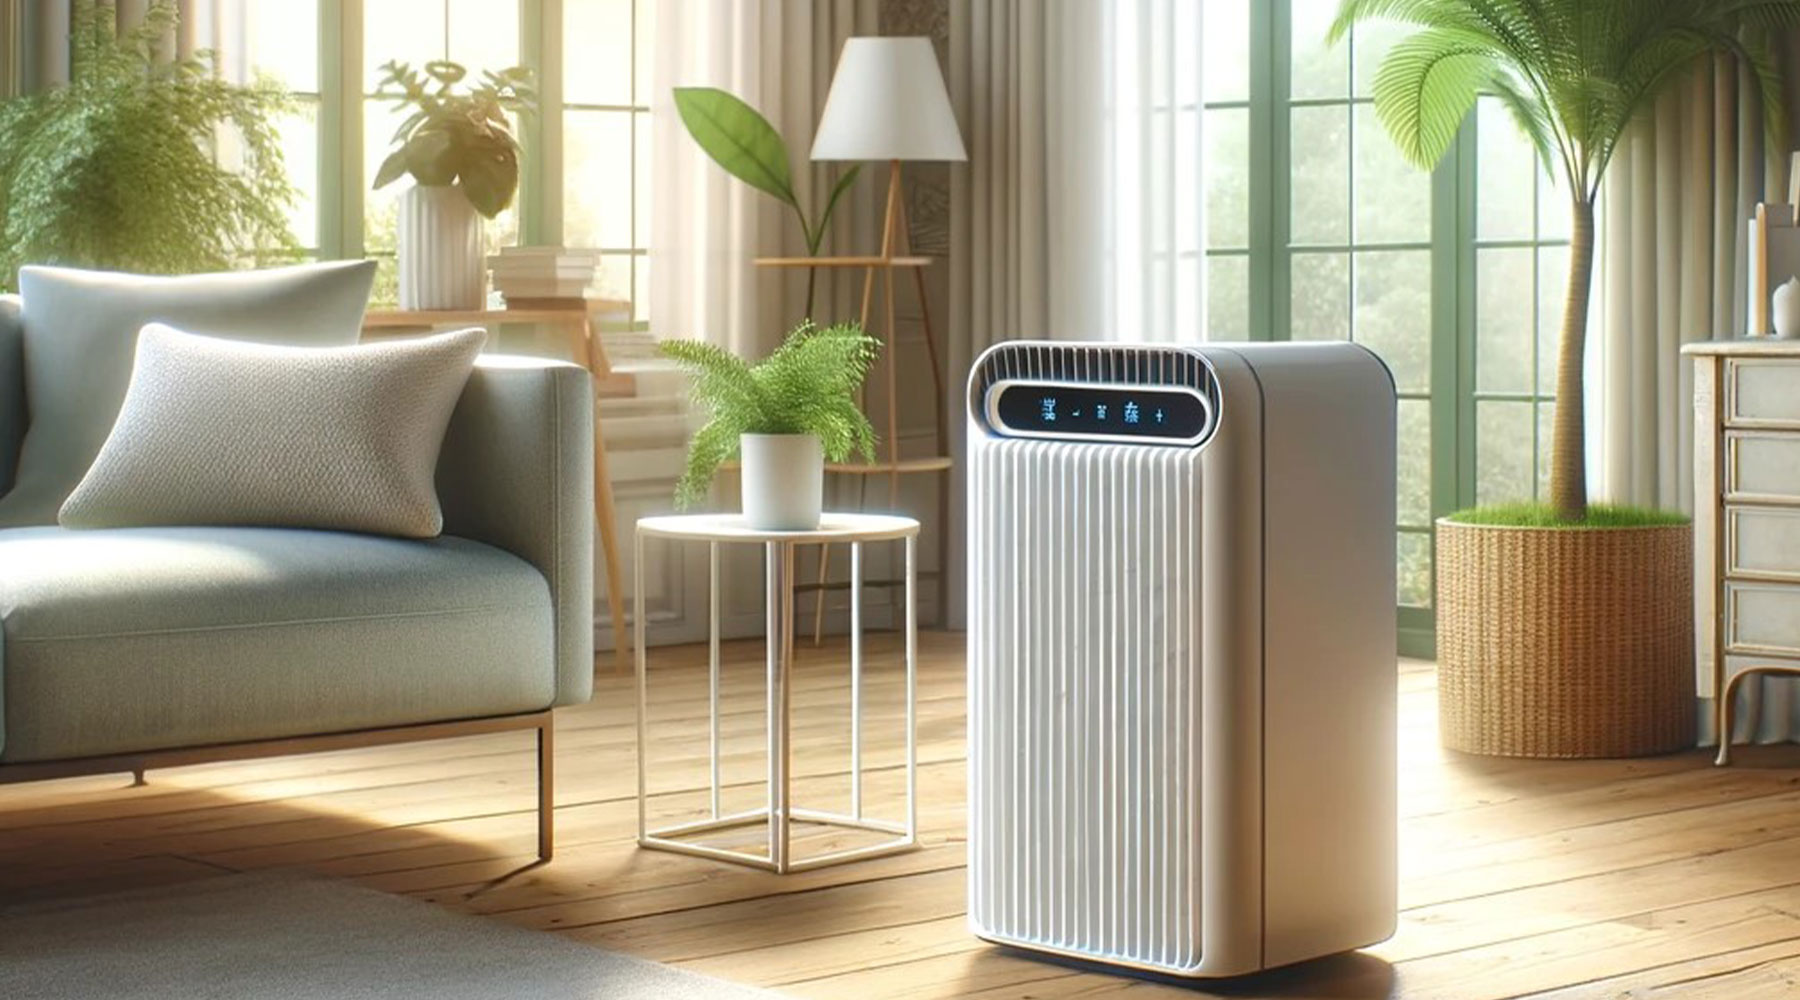 How to Clean Your Air Purifier: Step-by-Step Guide - The Cleaning Station